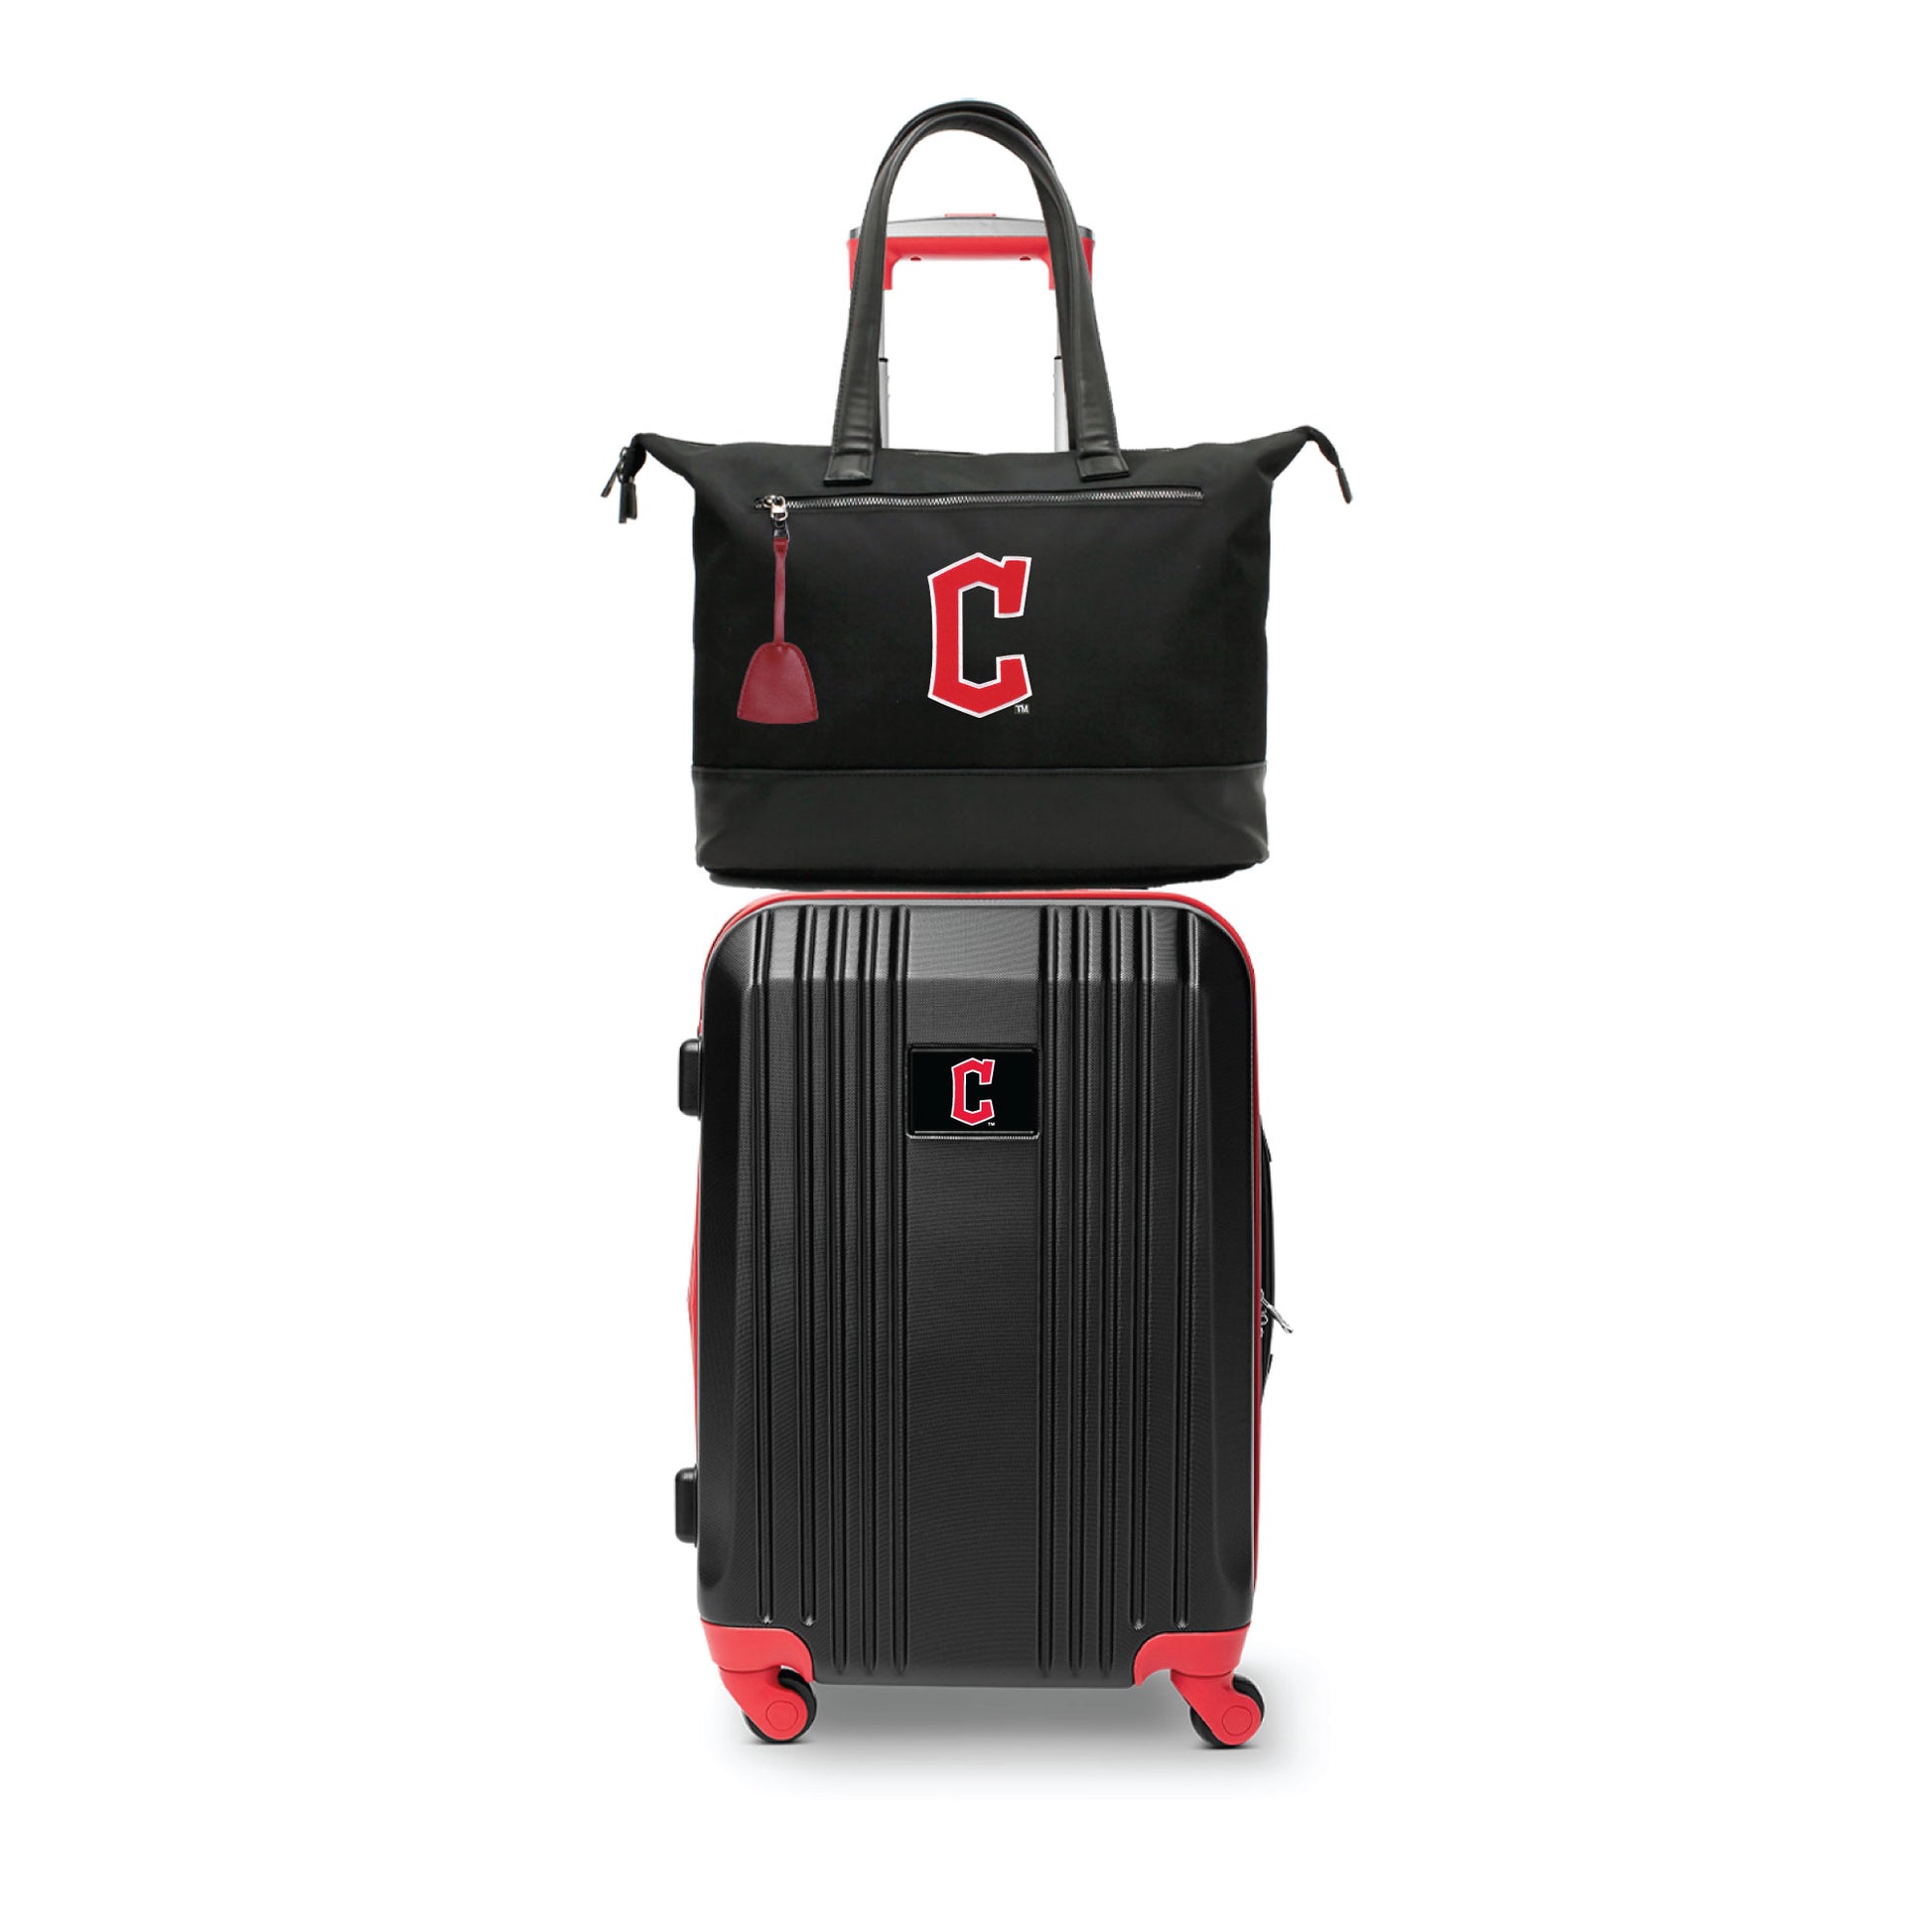 Cleveland Guardians Premium Laptop Tote Bag and Luggage Set